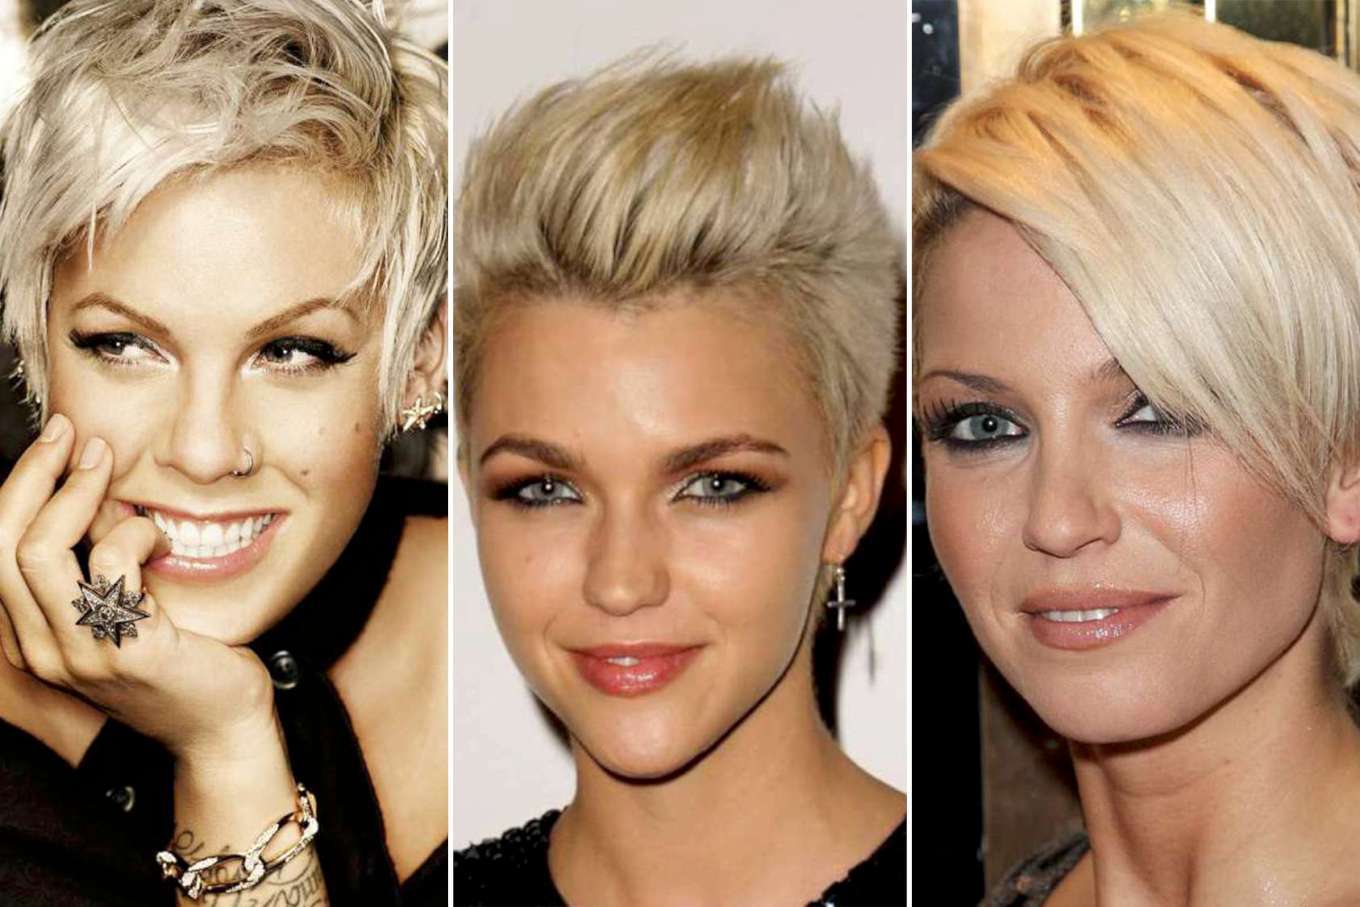 Hairstyles For Short Hair - 1